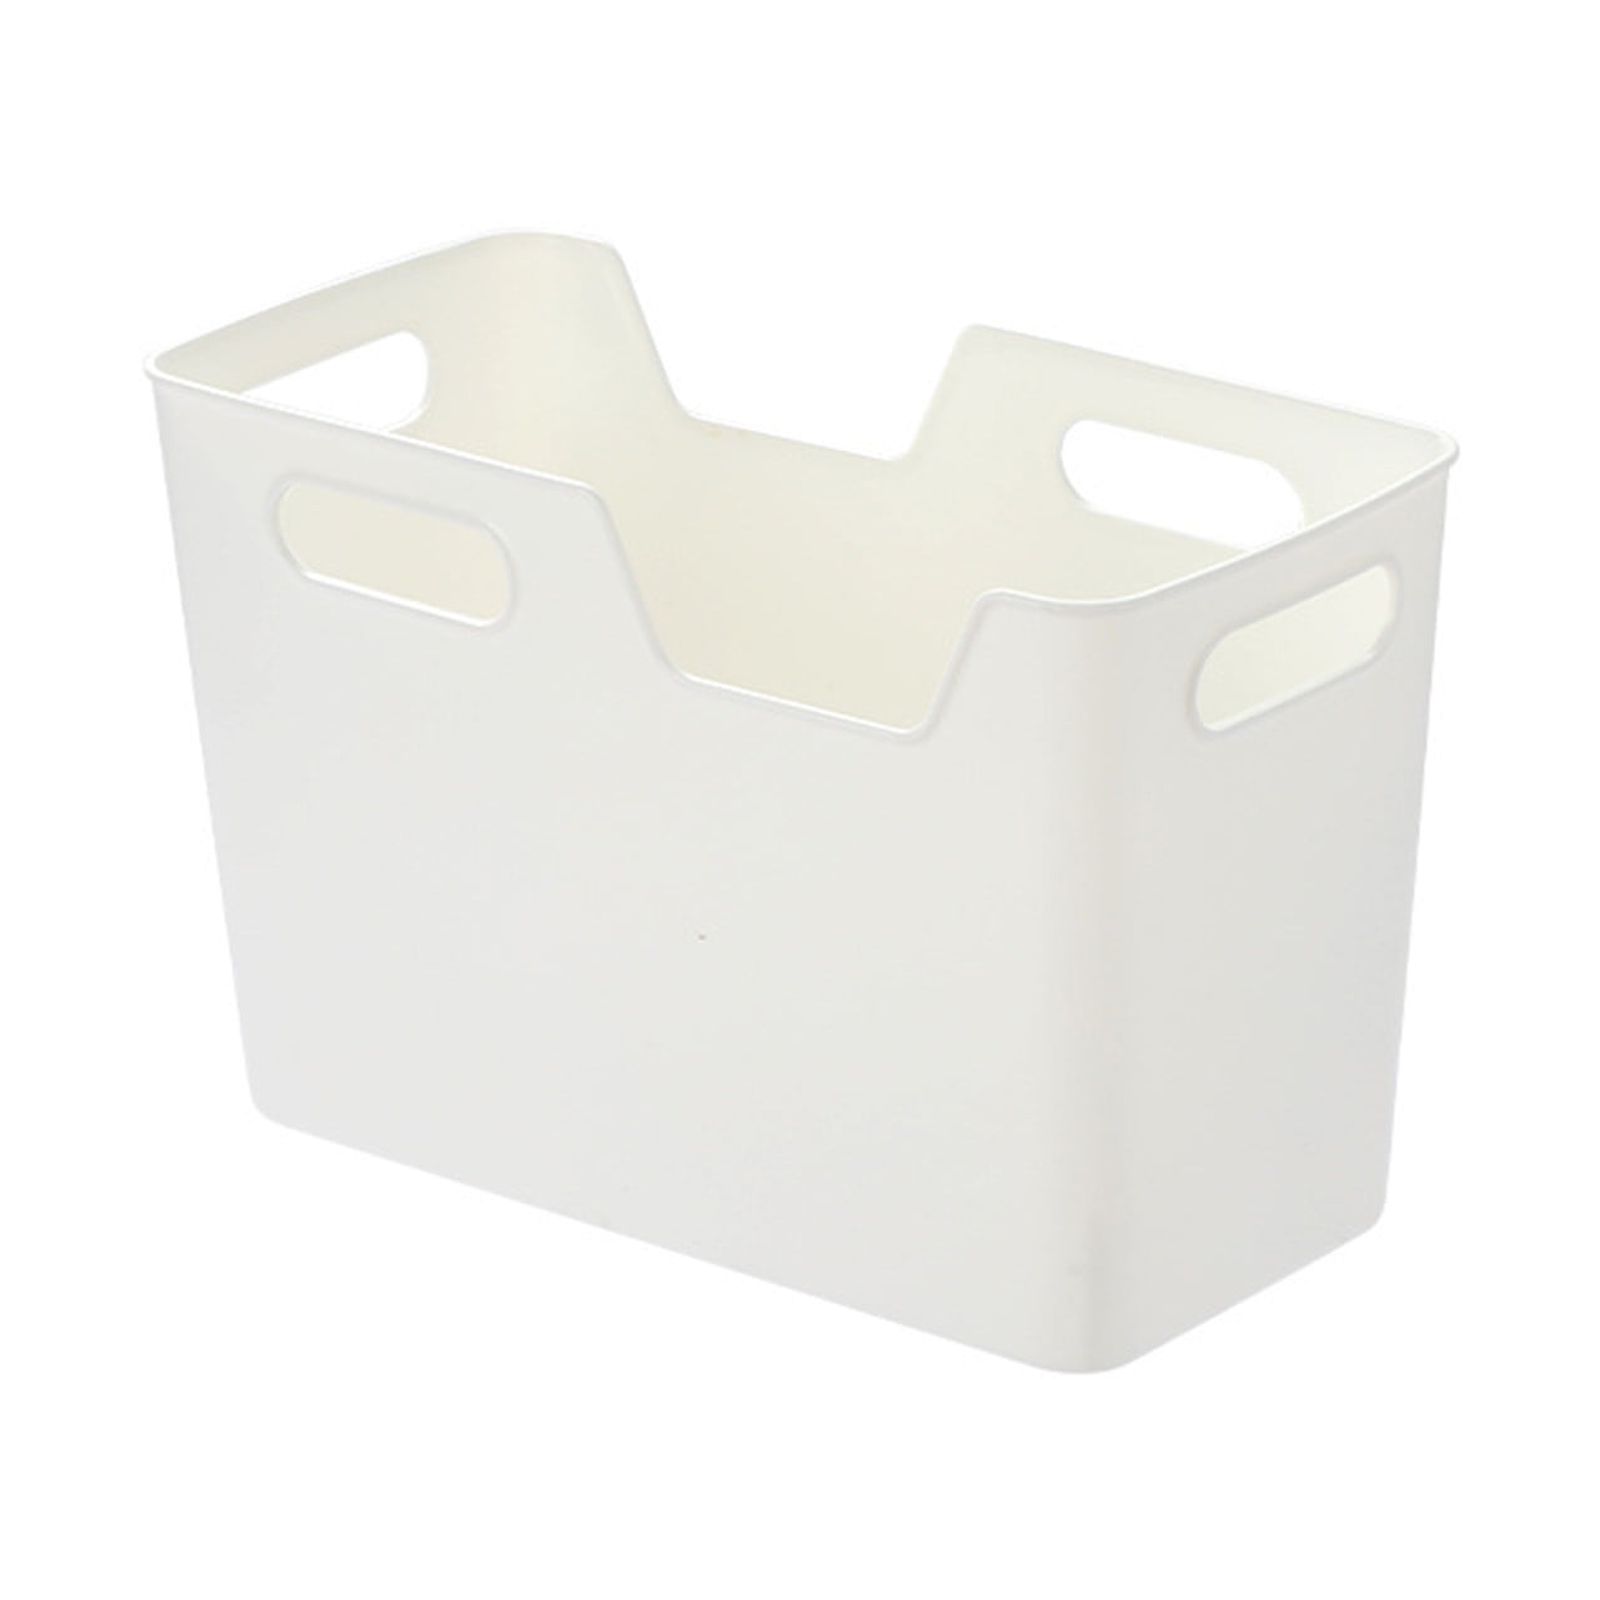 KQJQS White Plastic Storage Bins For Pantry Organization With Four Handles - image 1 of 8